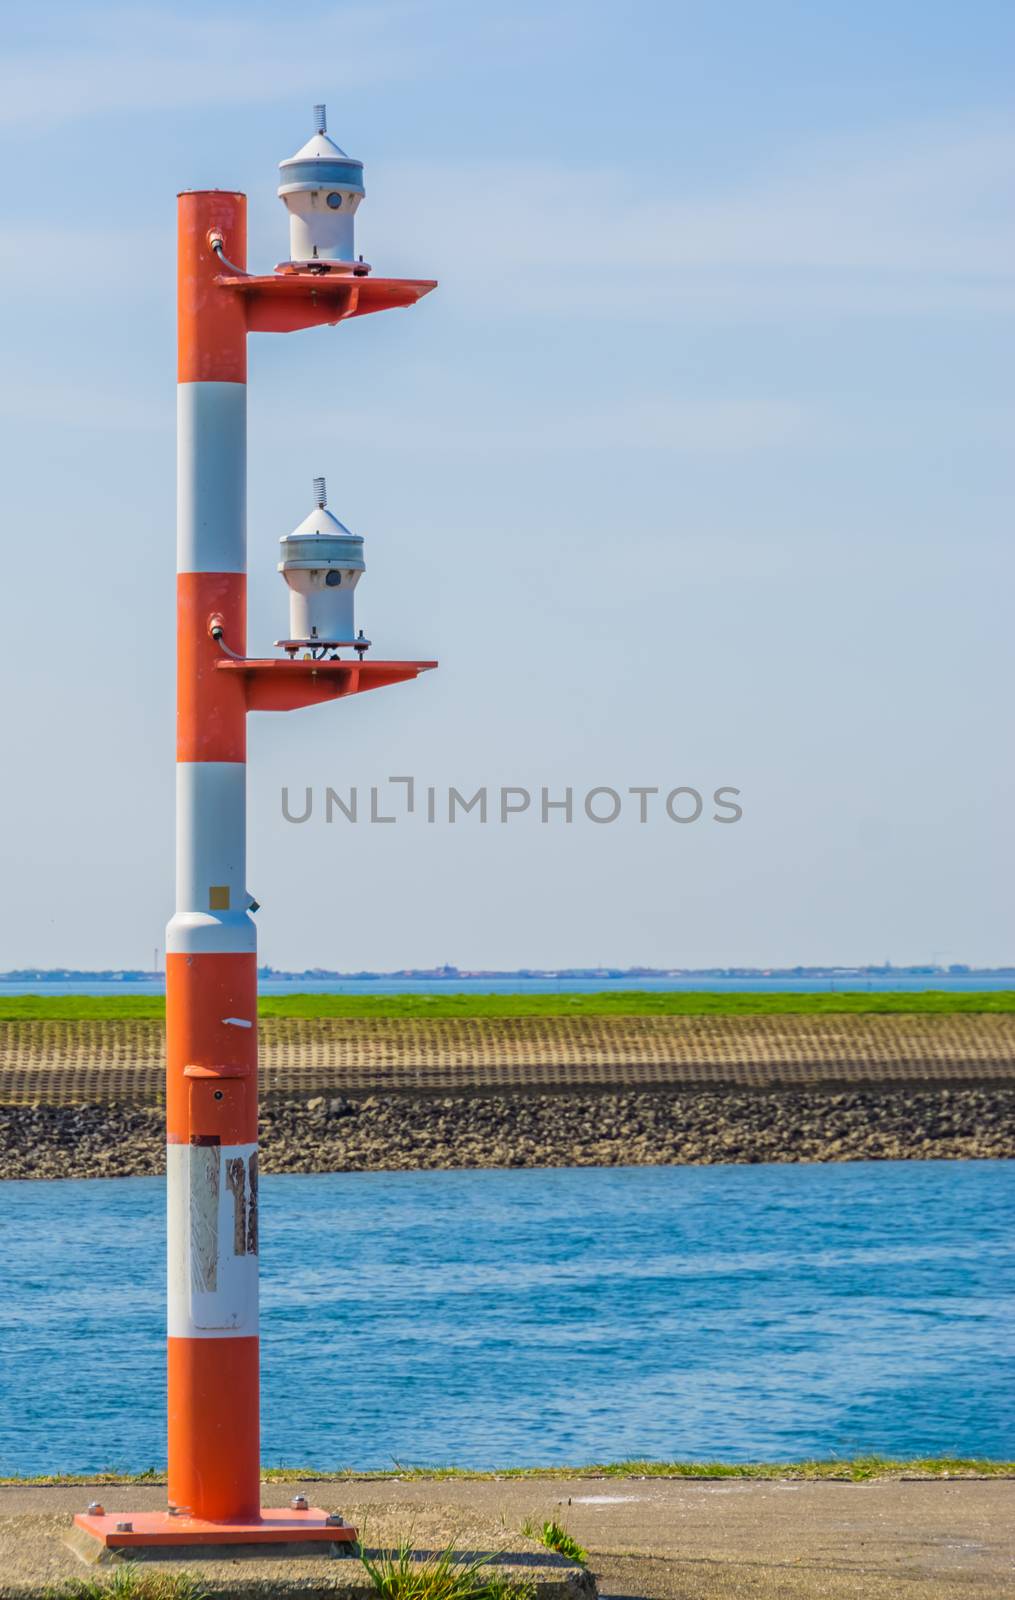 red with white striped light pole at the harbor of Tholen, lamppost for the ships